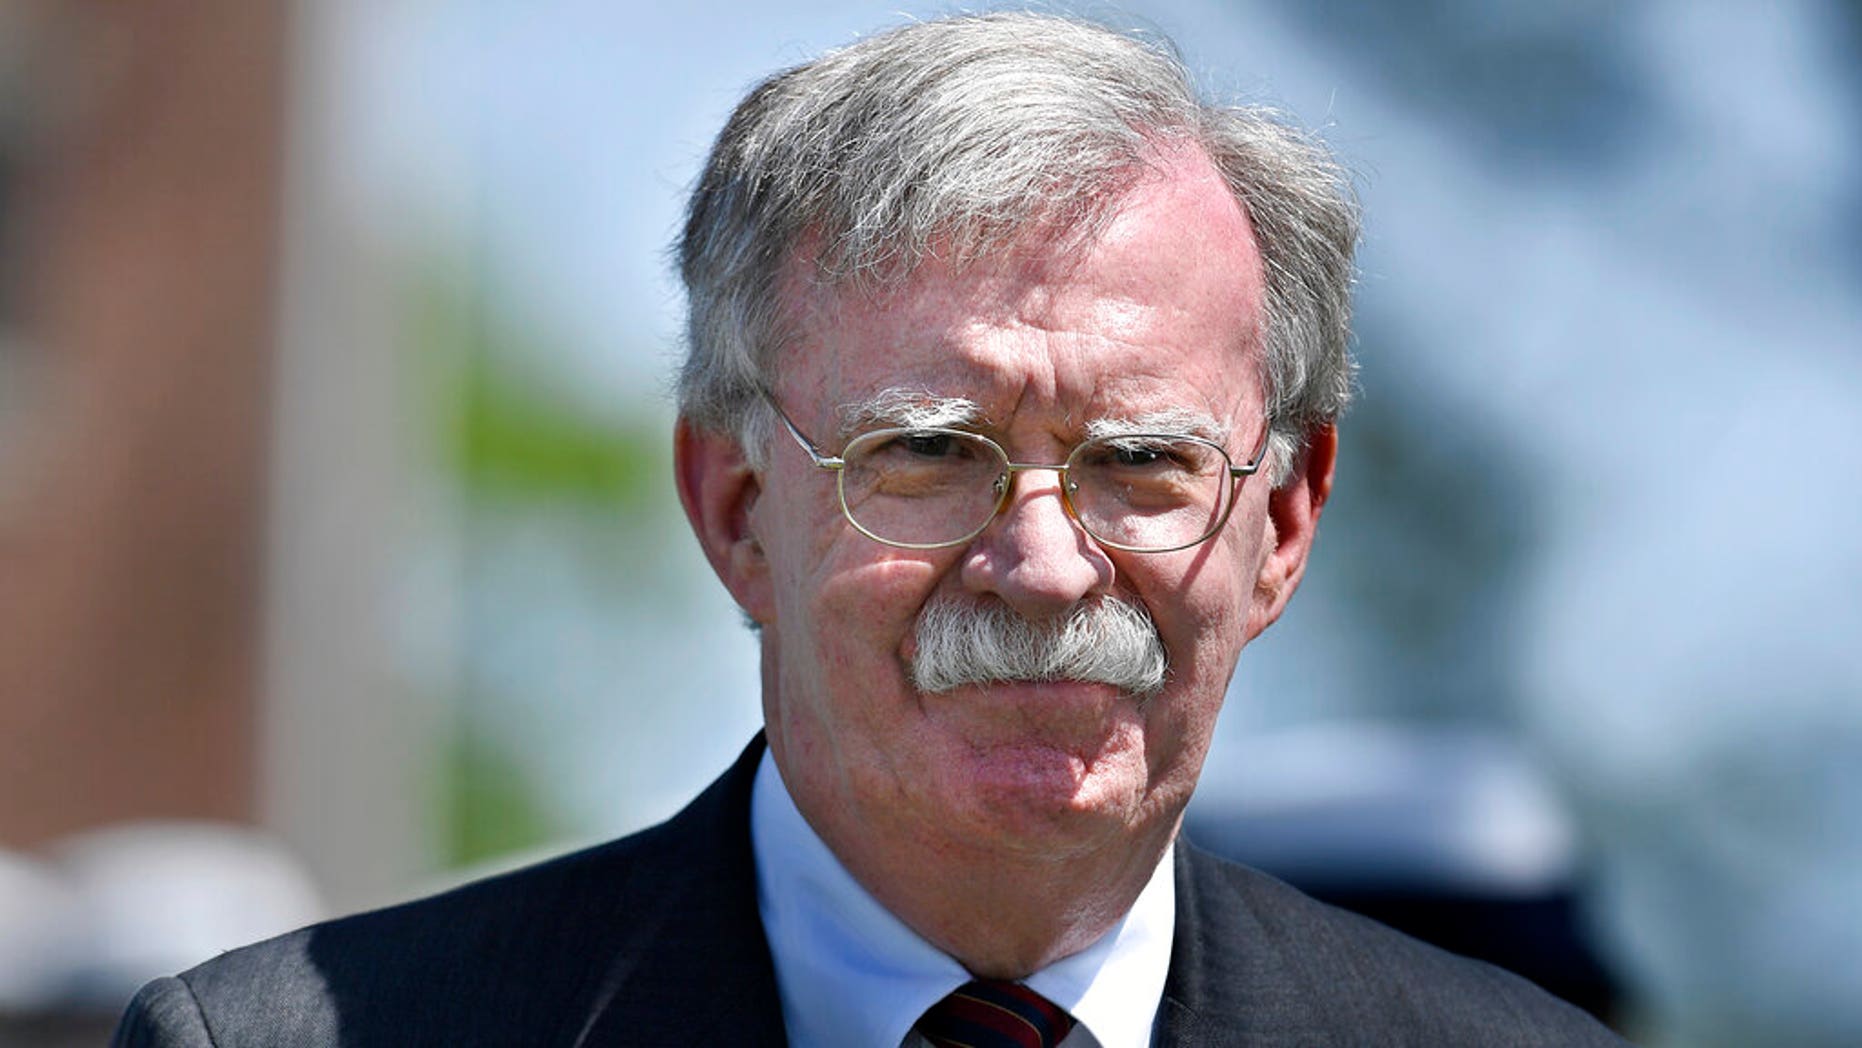 FILE: National Security Adviser John Bolton arrives to speak at the commencement for the United States Coast Guard Academy in New London, Conn.